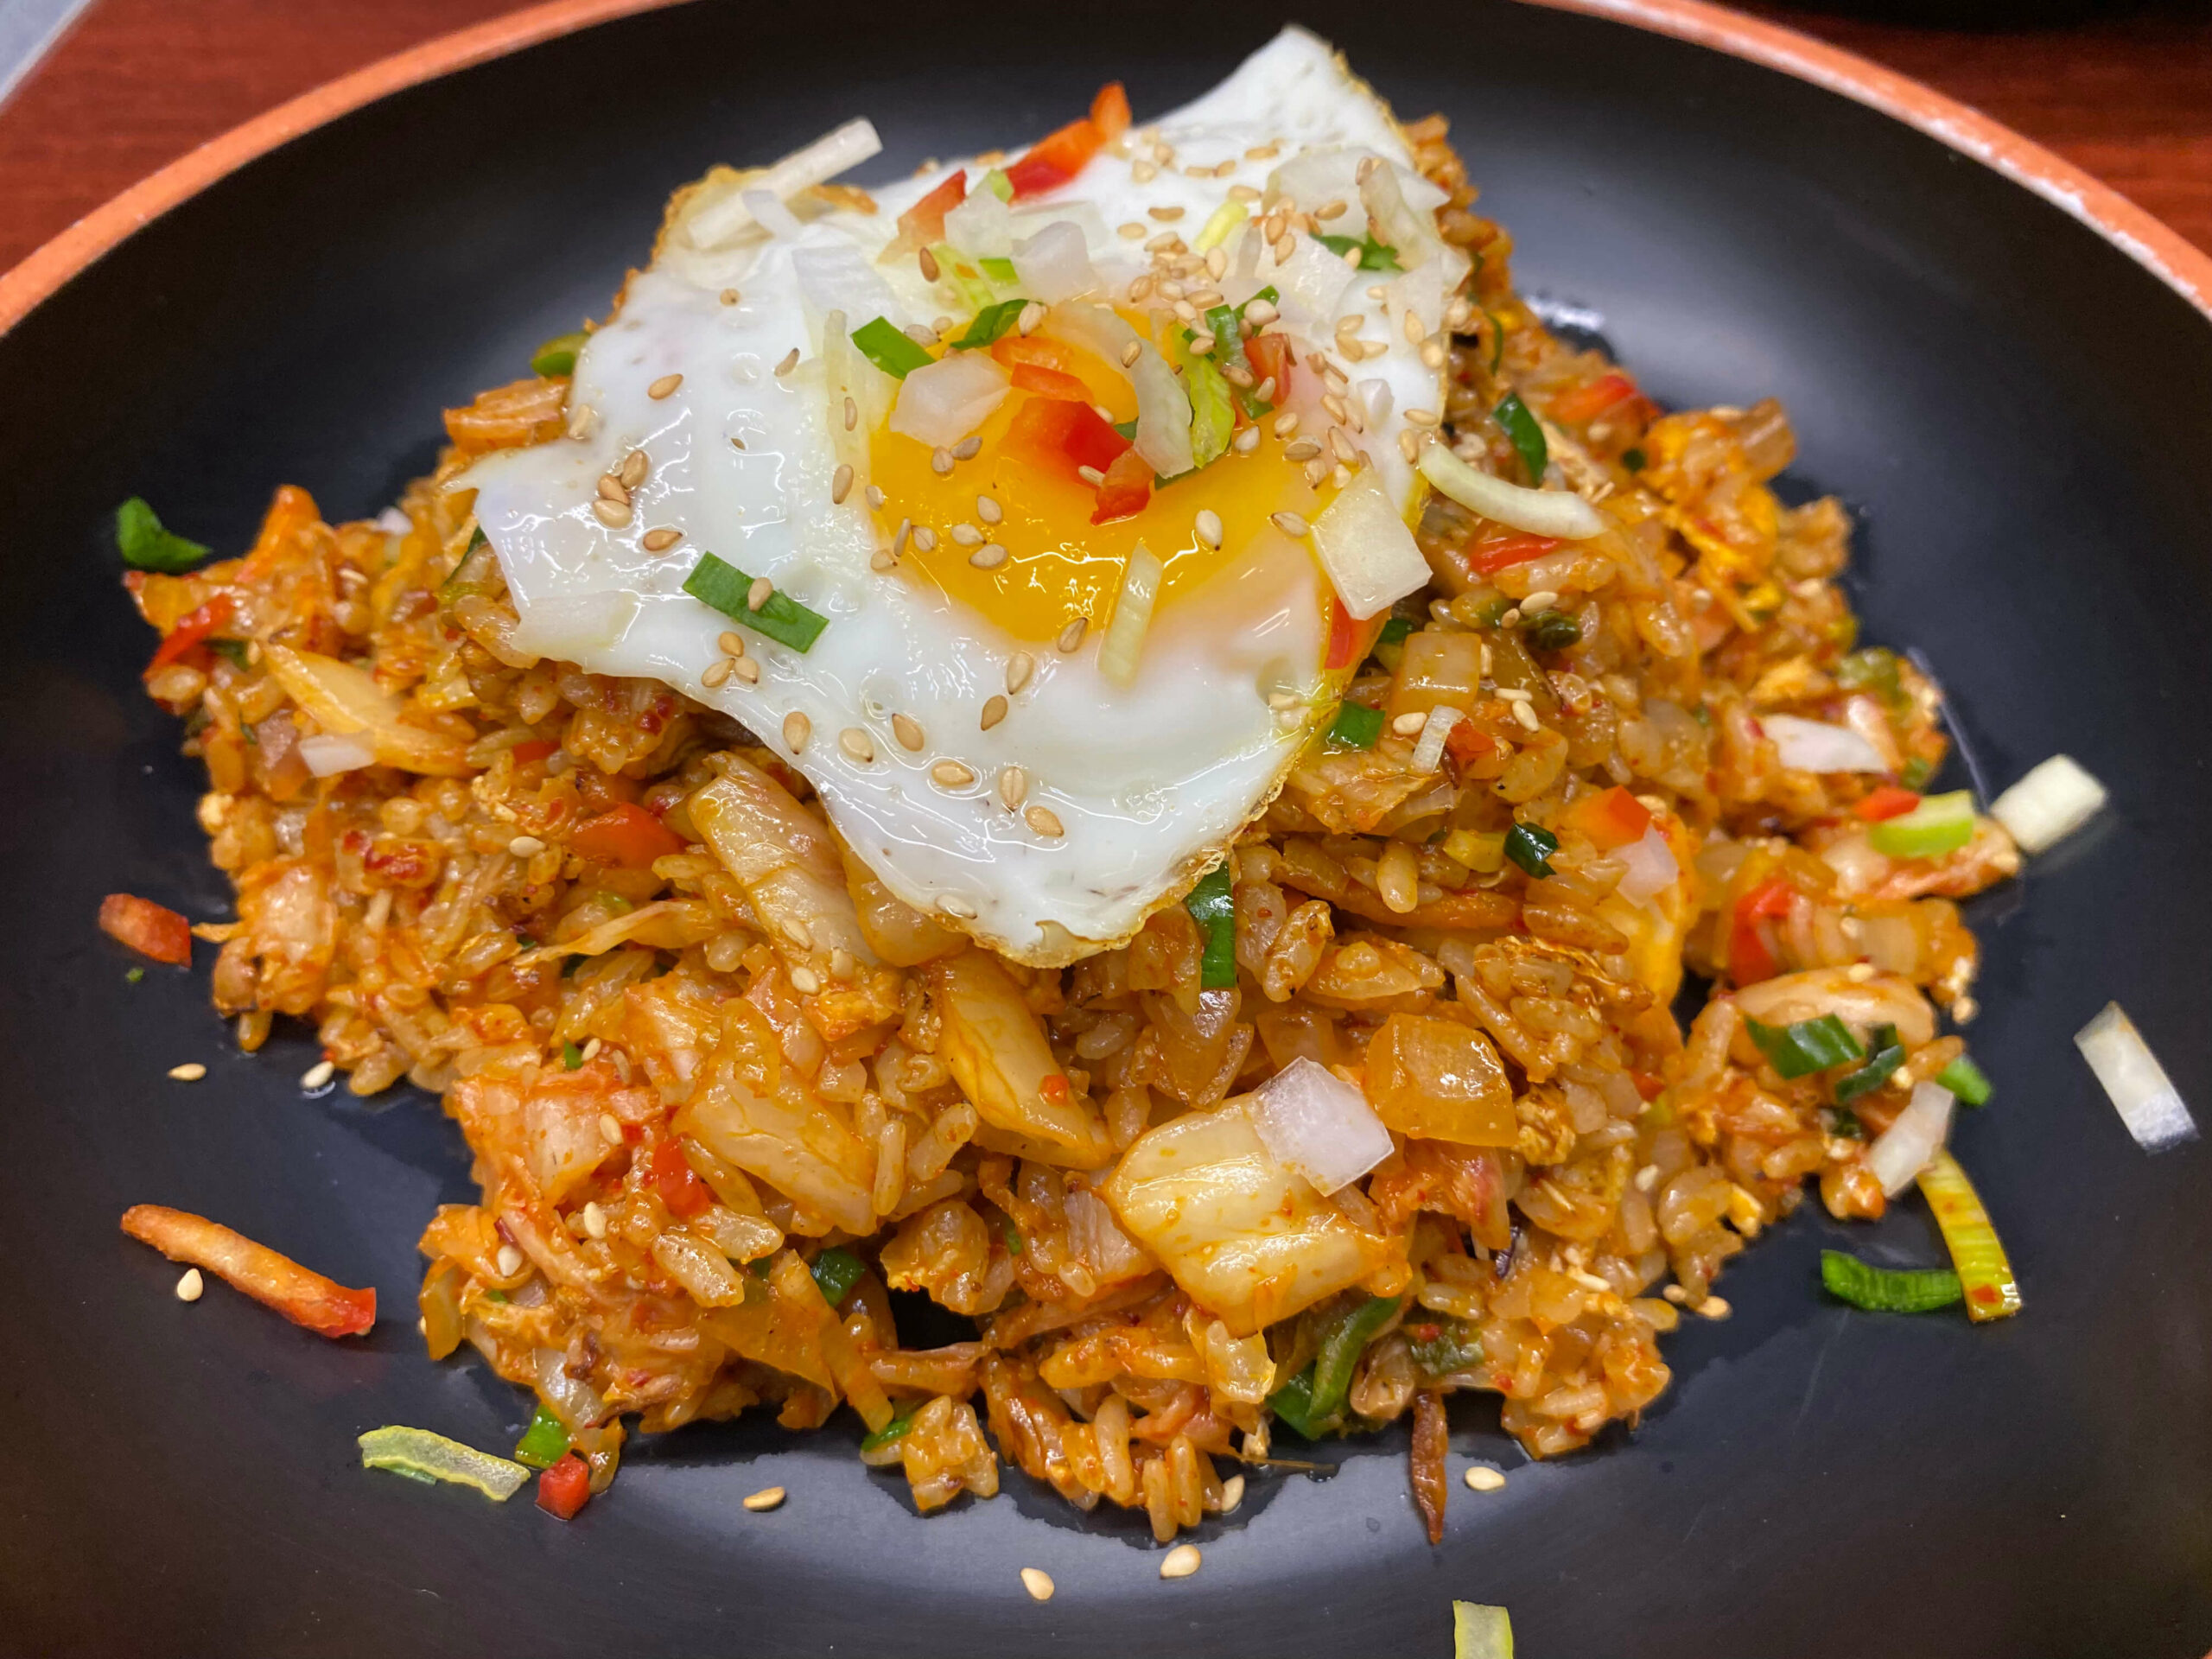 Kimchi Fried Rice topped with a sunny side egg